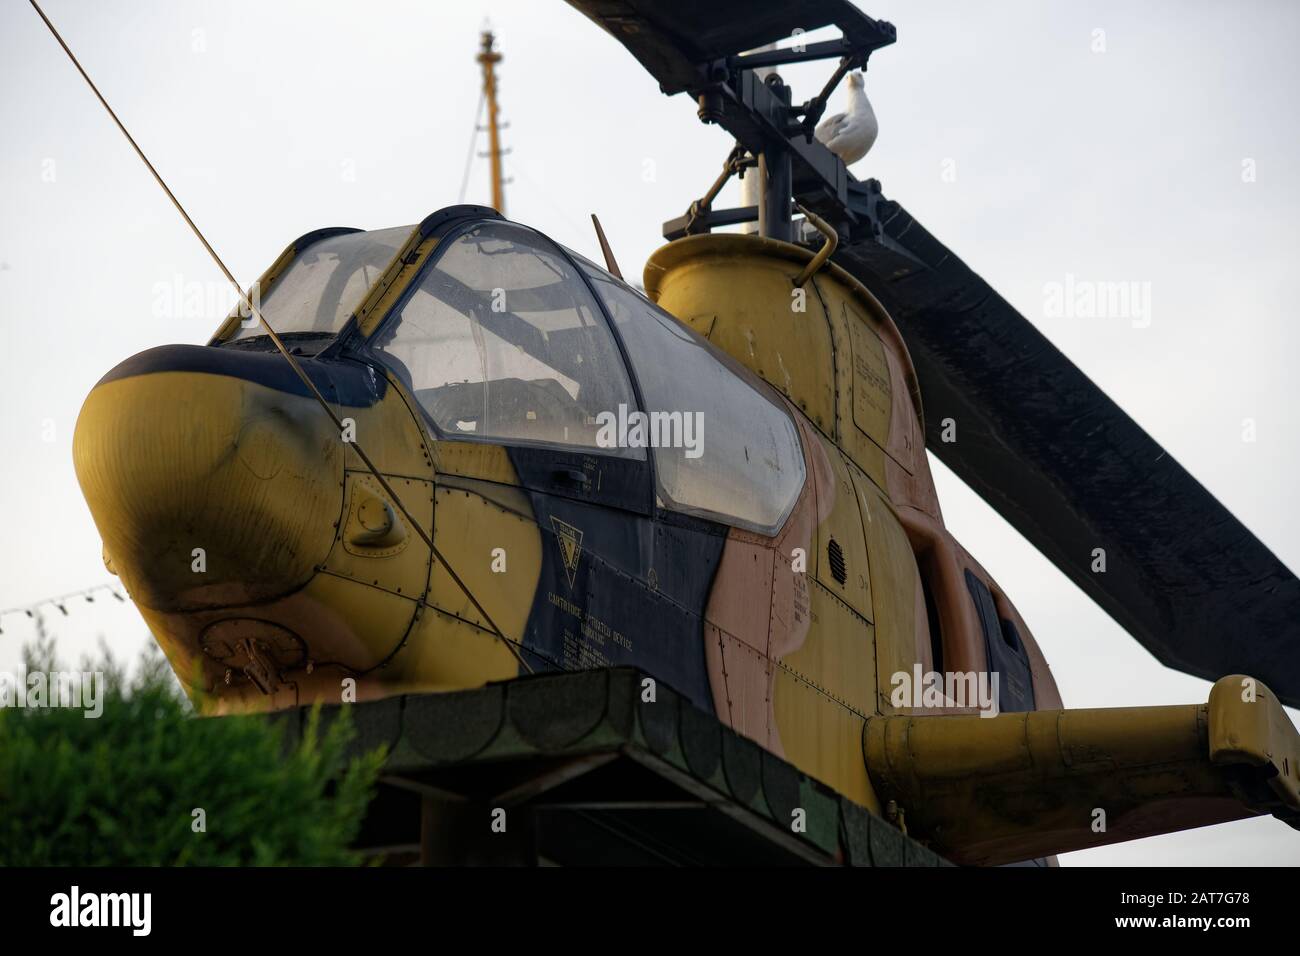 Bell AH-1 Cobra Helicopter also known as Huey Cobra a jet-powered attack helicopter, designed by Bell Helicopter and developed for the US Army. Stock Photo